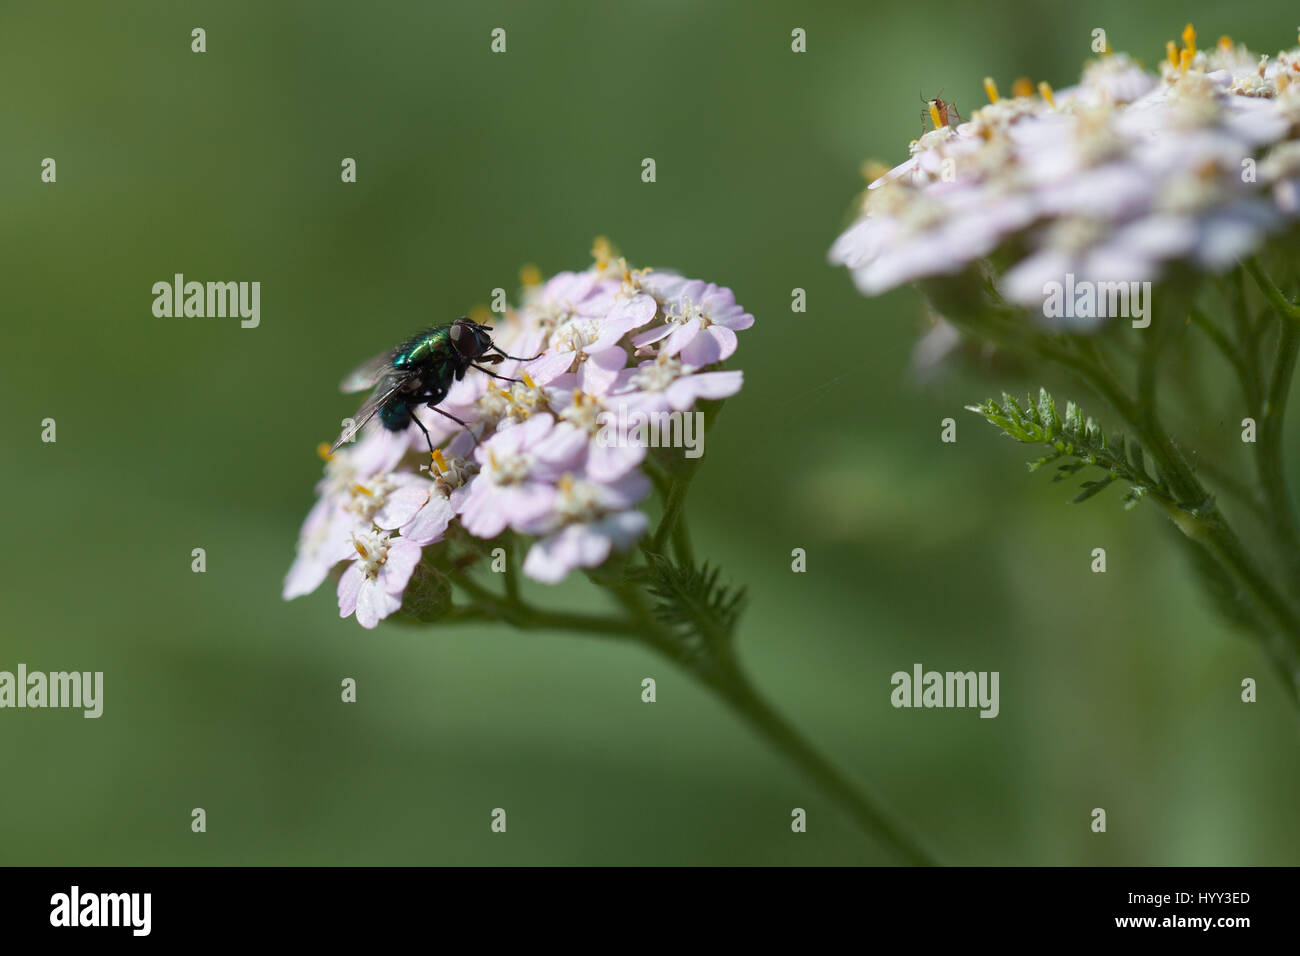 Green fly foraging in pink yarrow flowers isolated on a blurry green background Stock Photo